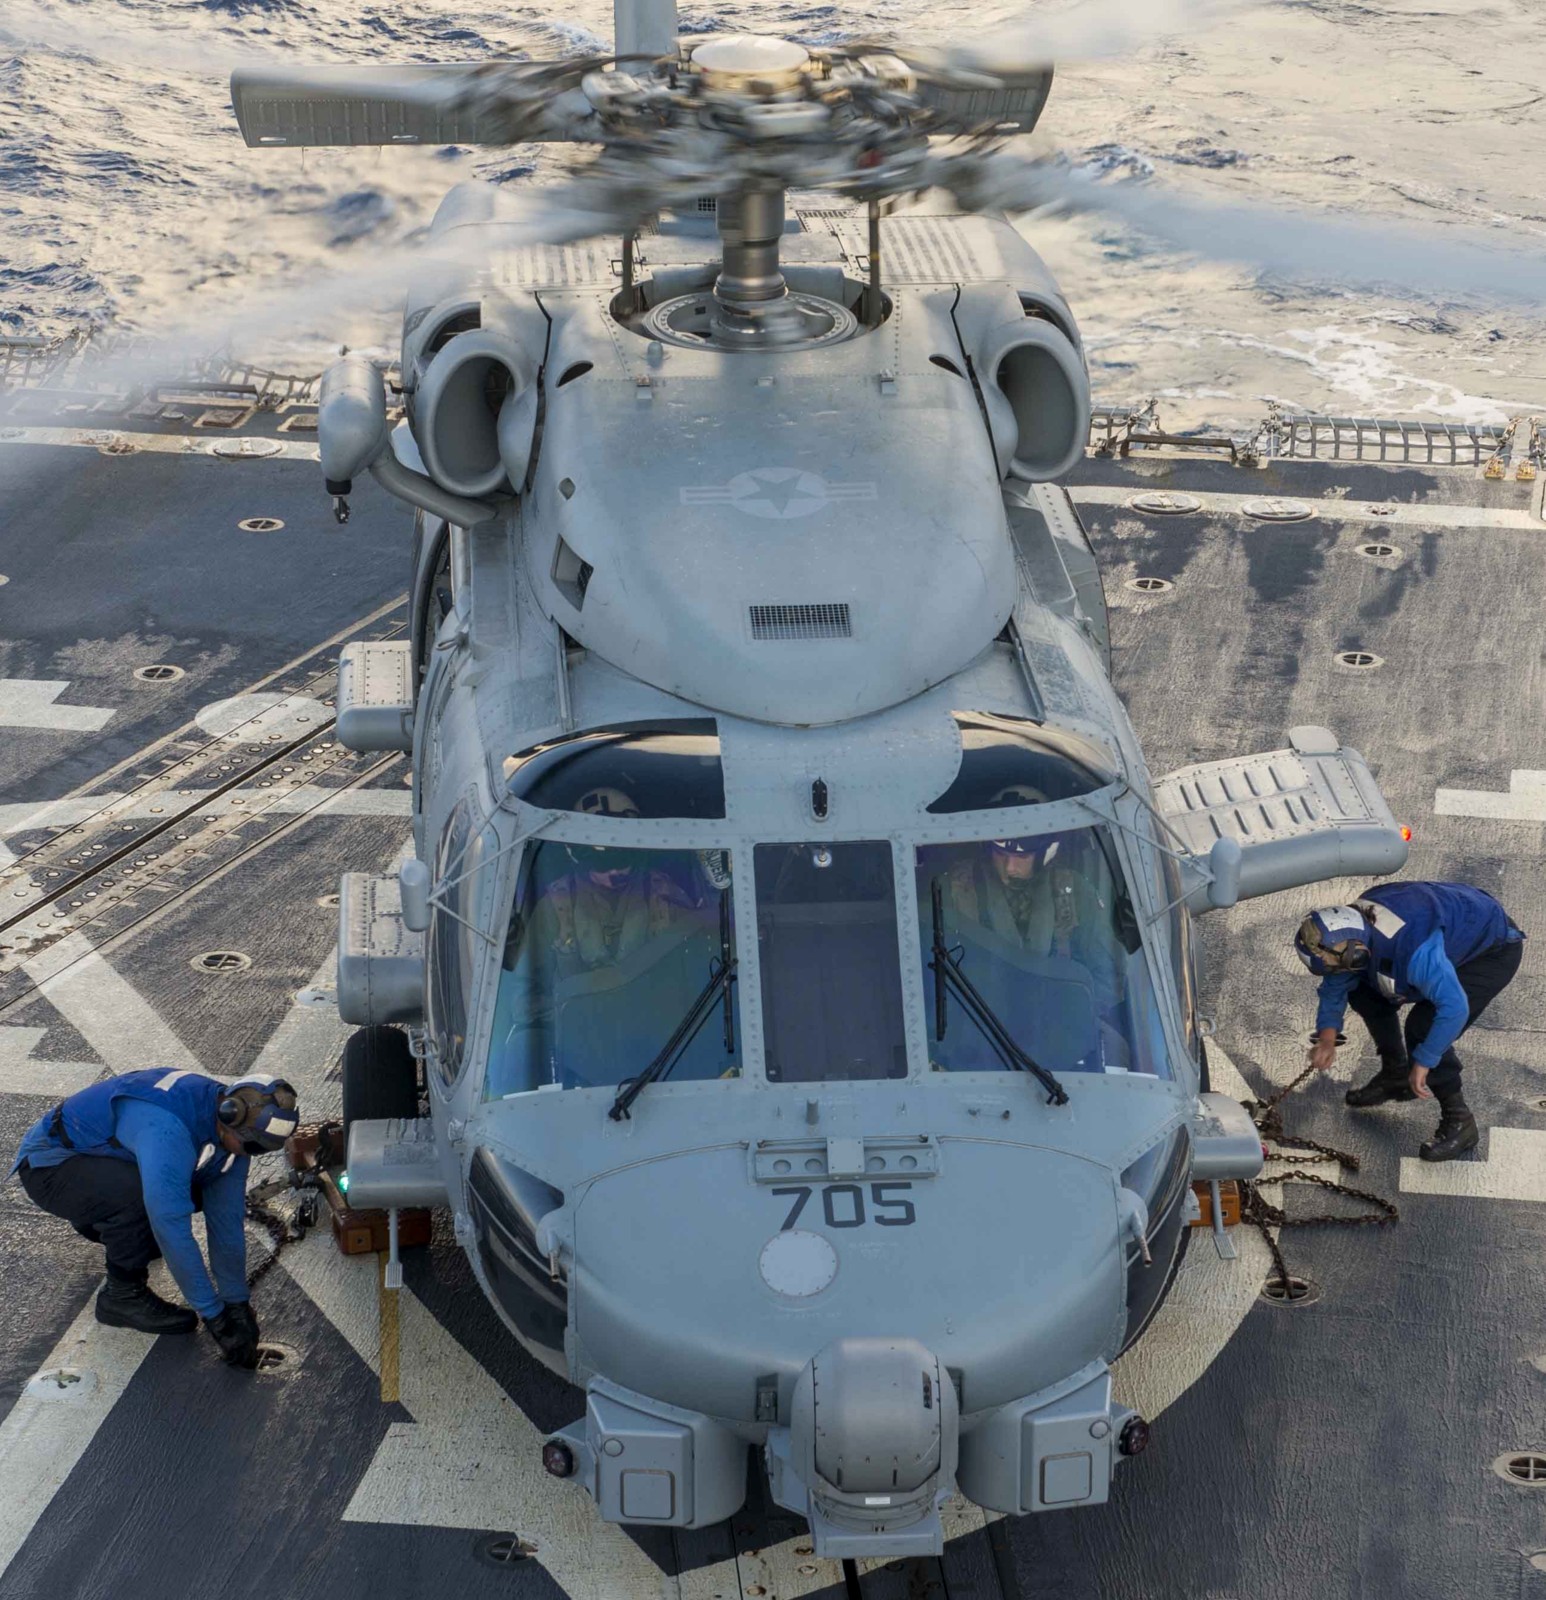 hsm-72 proud warriors helicopter maritime strike squadron us navy mh-60r seahawk 2015 37